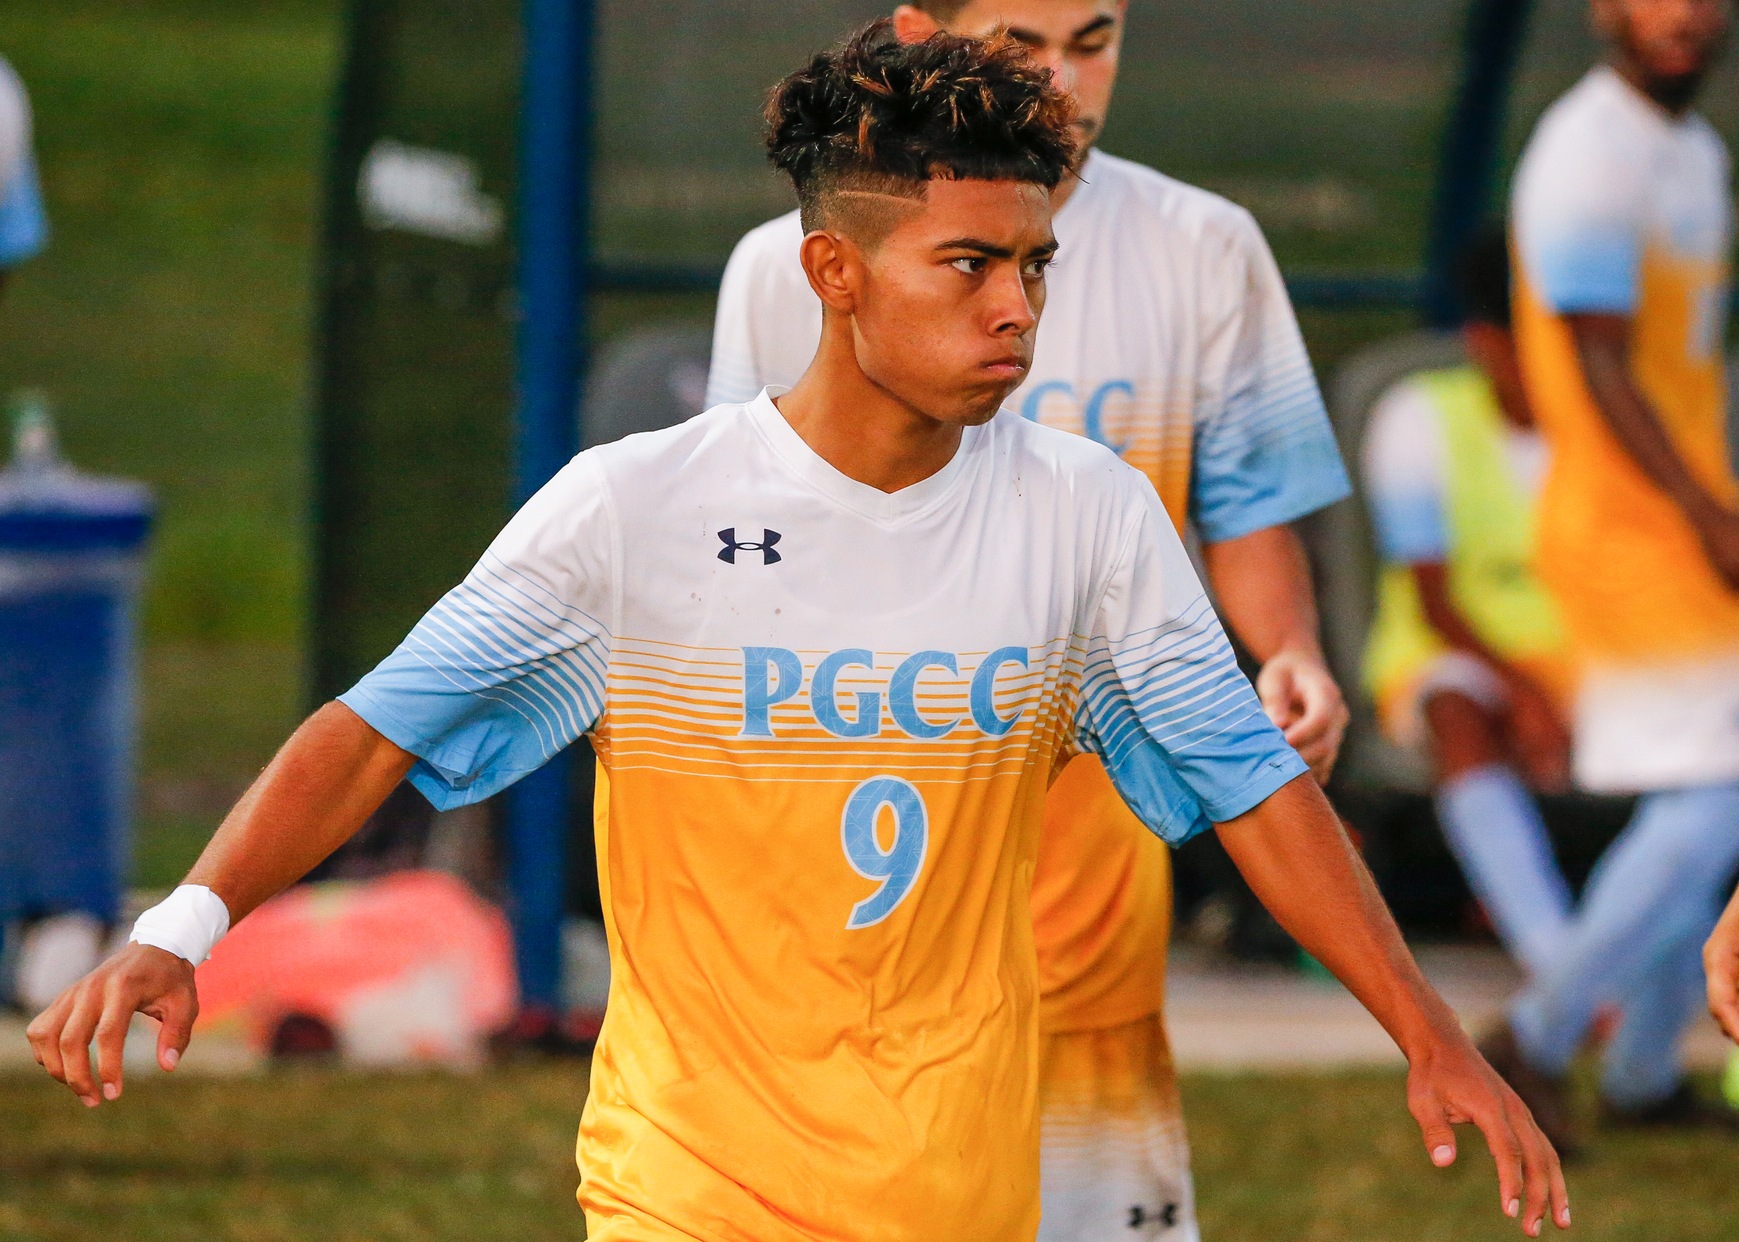 Men’s Soccer Sits Atop MD JUCO Rankings